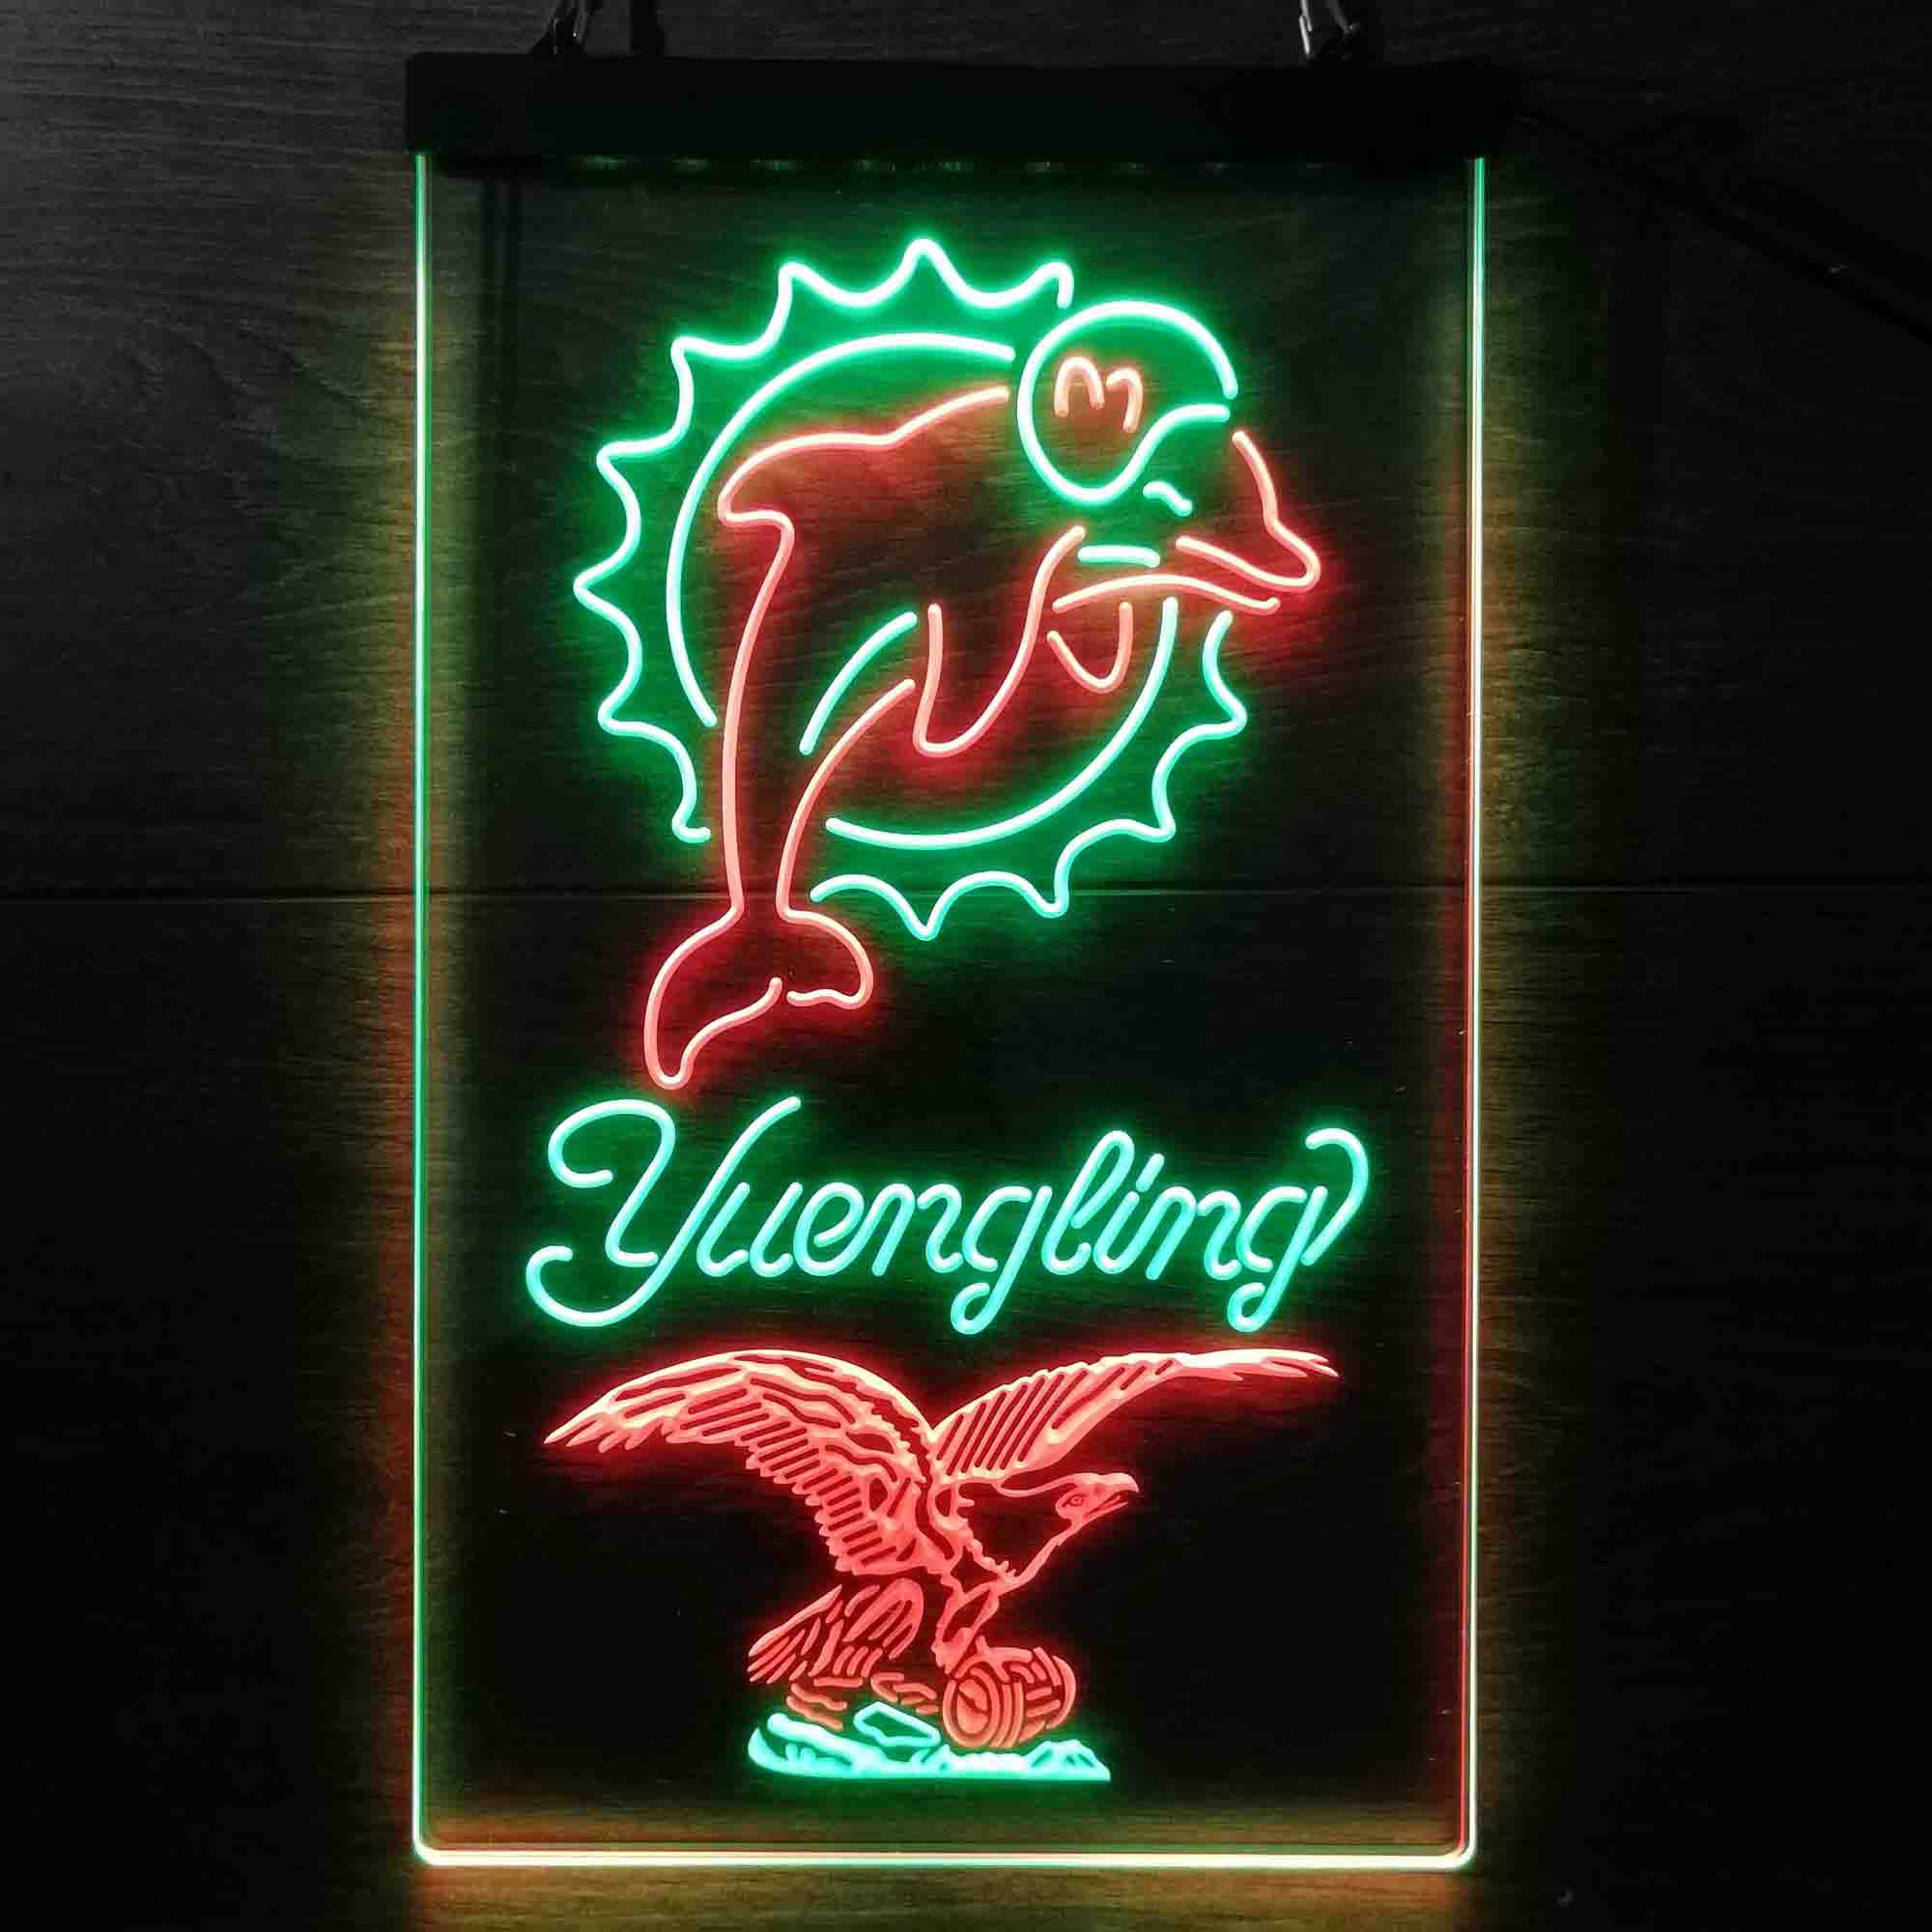 Yuengling Bar Miami Dolphins Est. 1966 LED Neon Sign